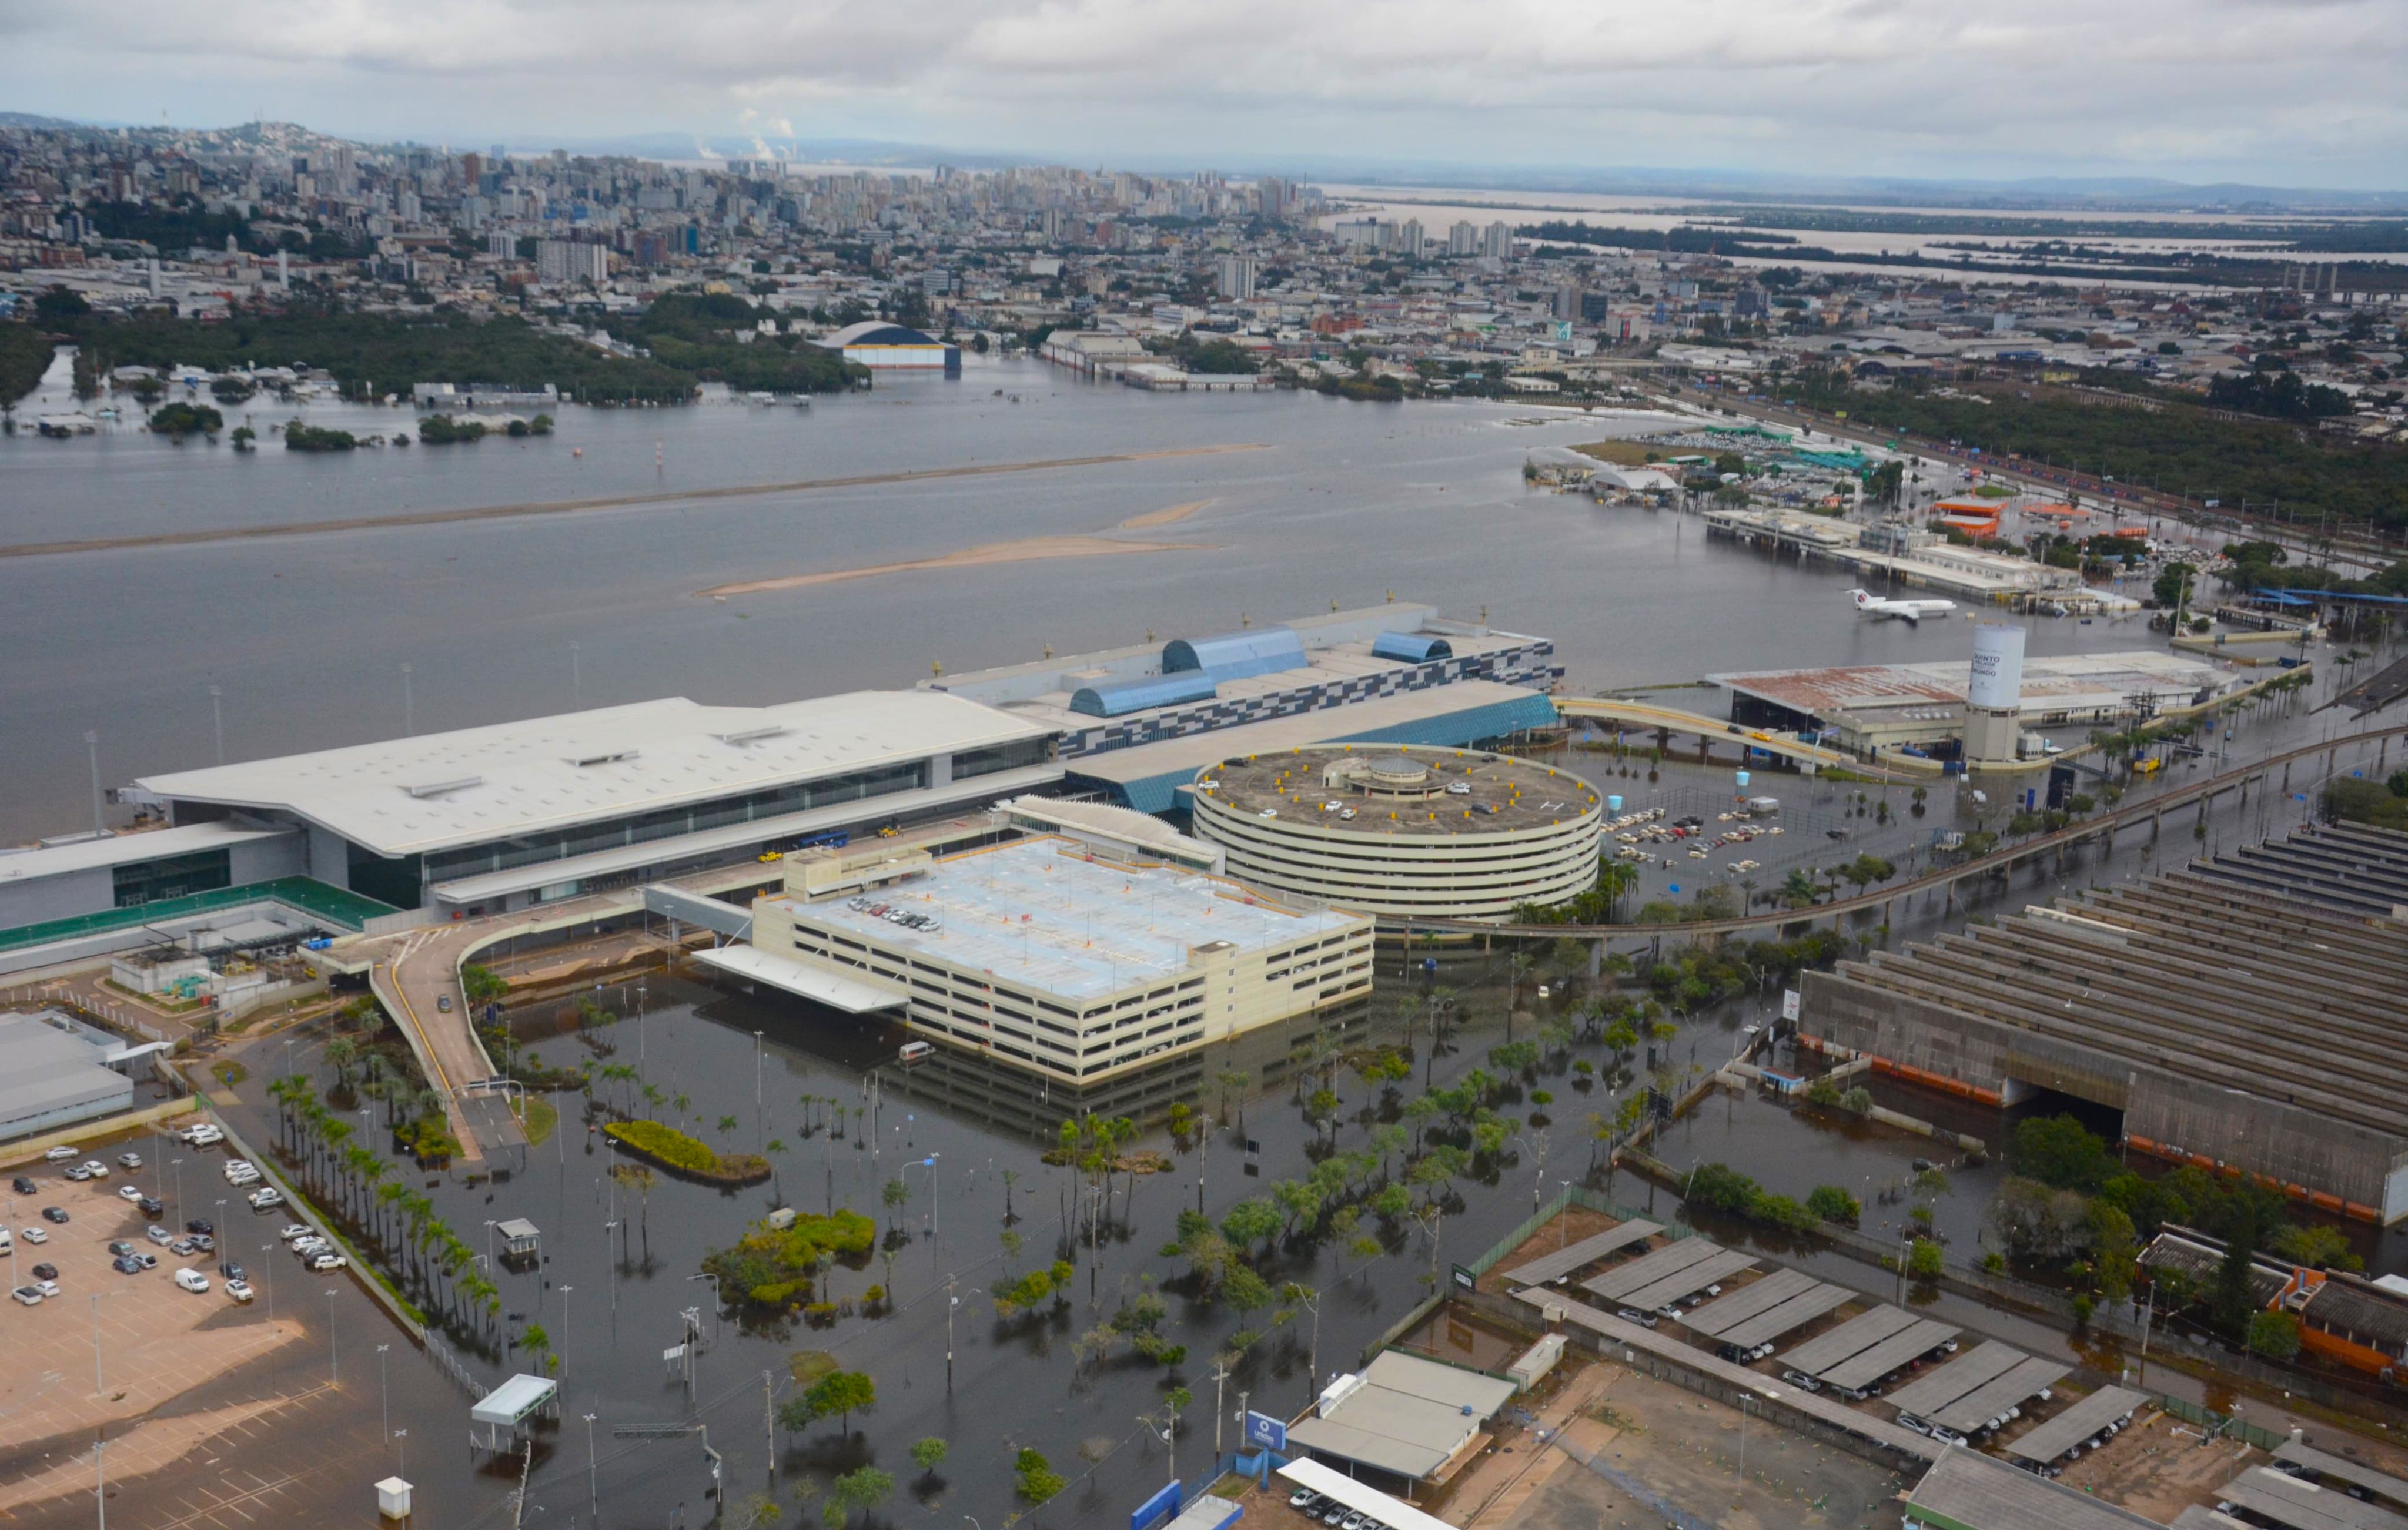 Porto Alegre's  Flood Damaged  Salgado Filho Airport  Will  Remain  Closed  For  Rest  Of  The  Year For Restoration.